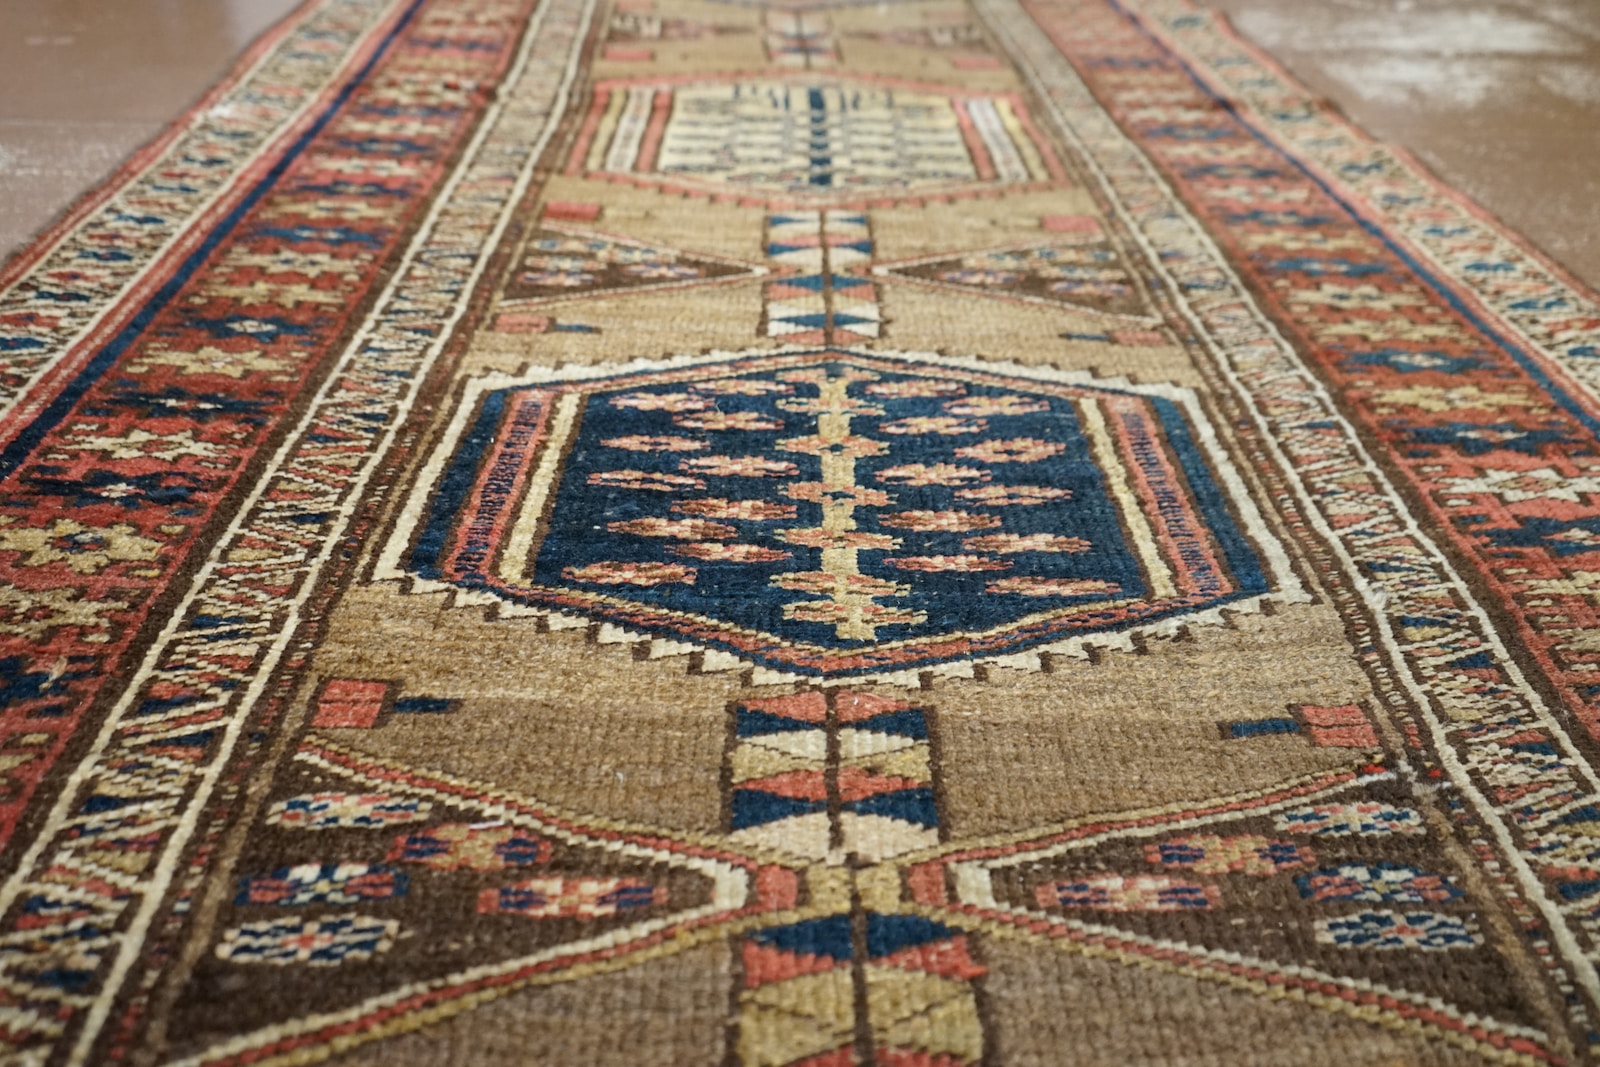 A large oriental rug on a wooden floor